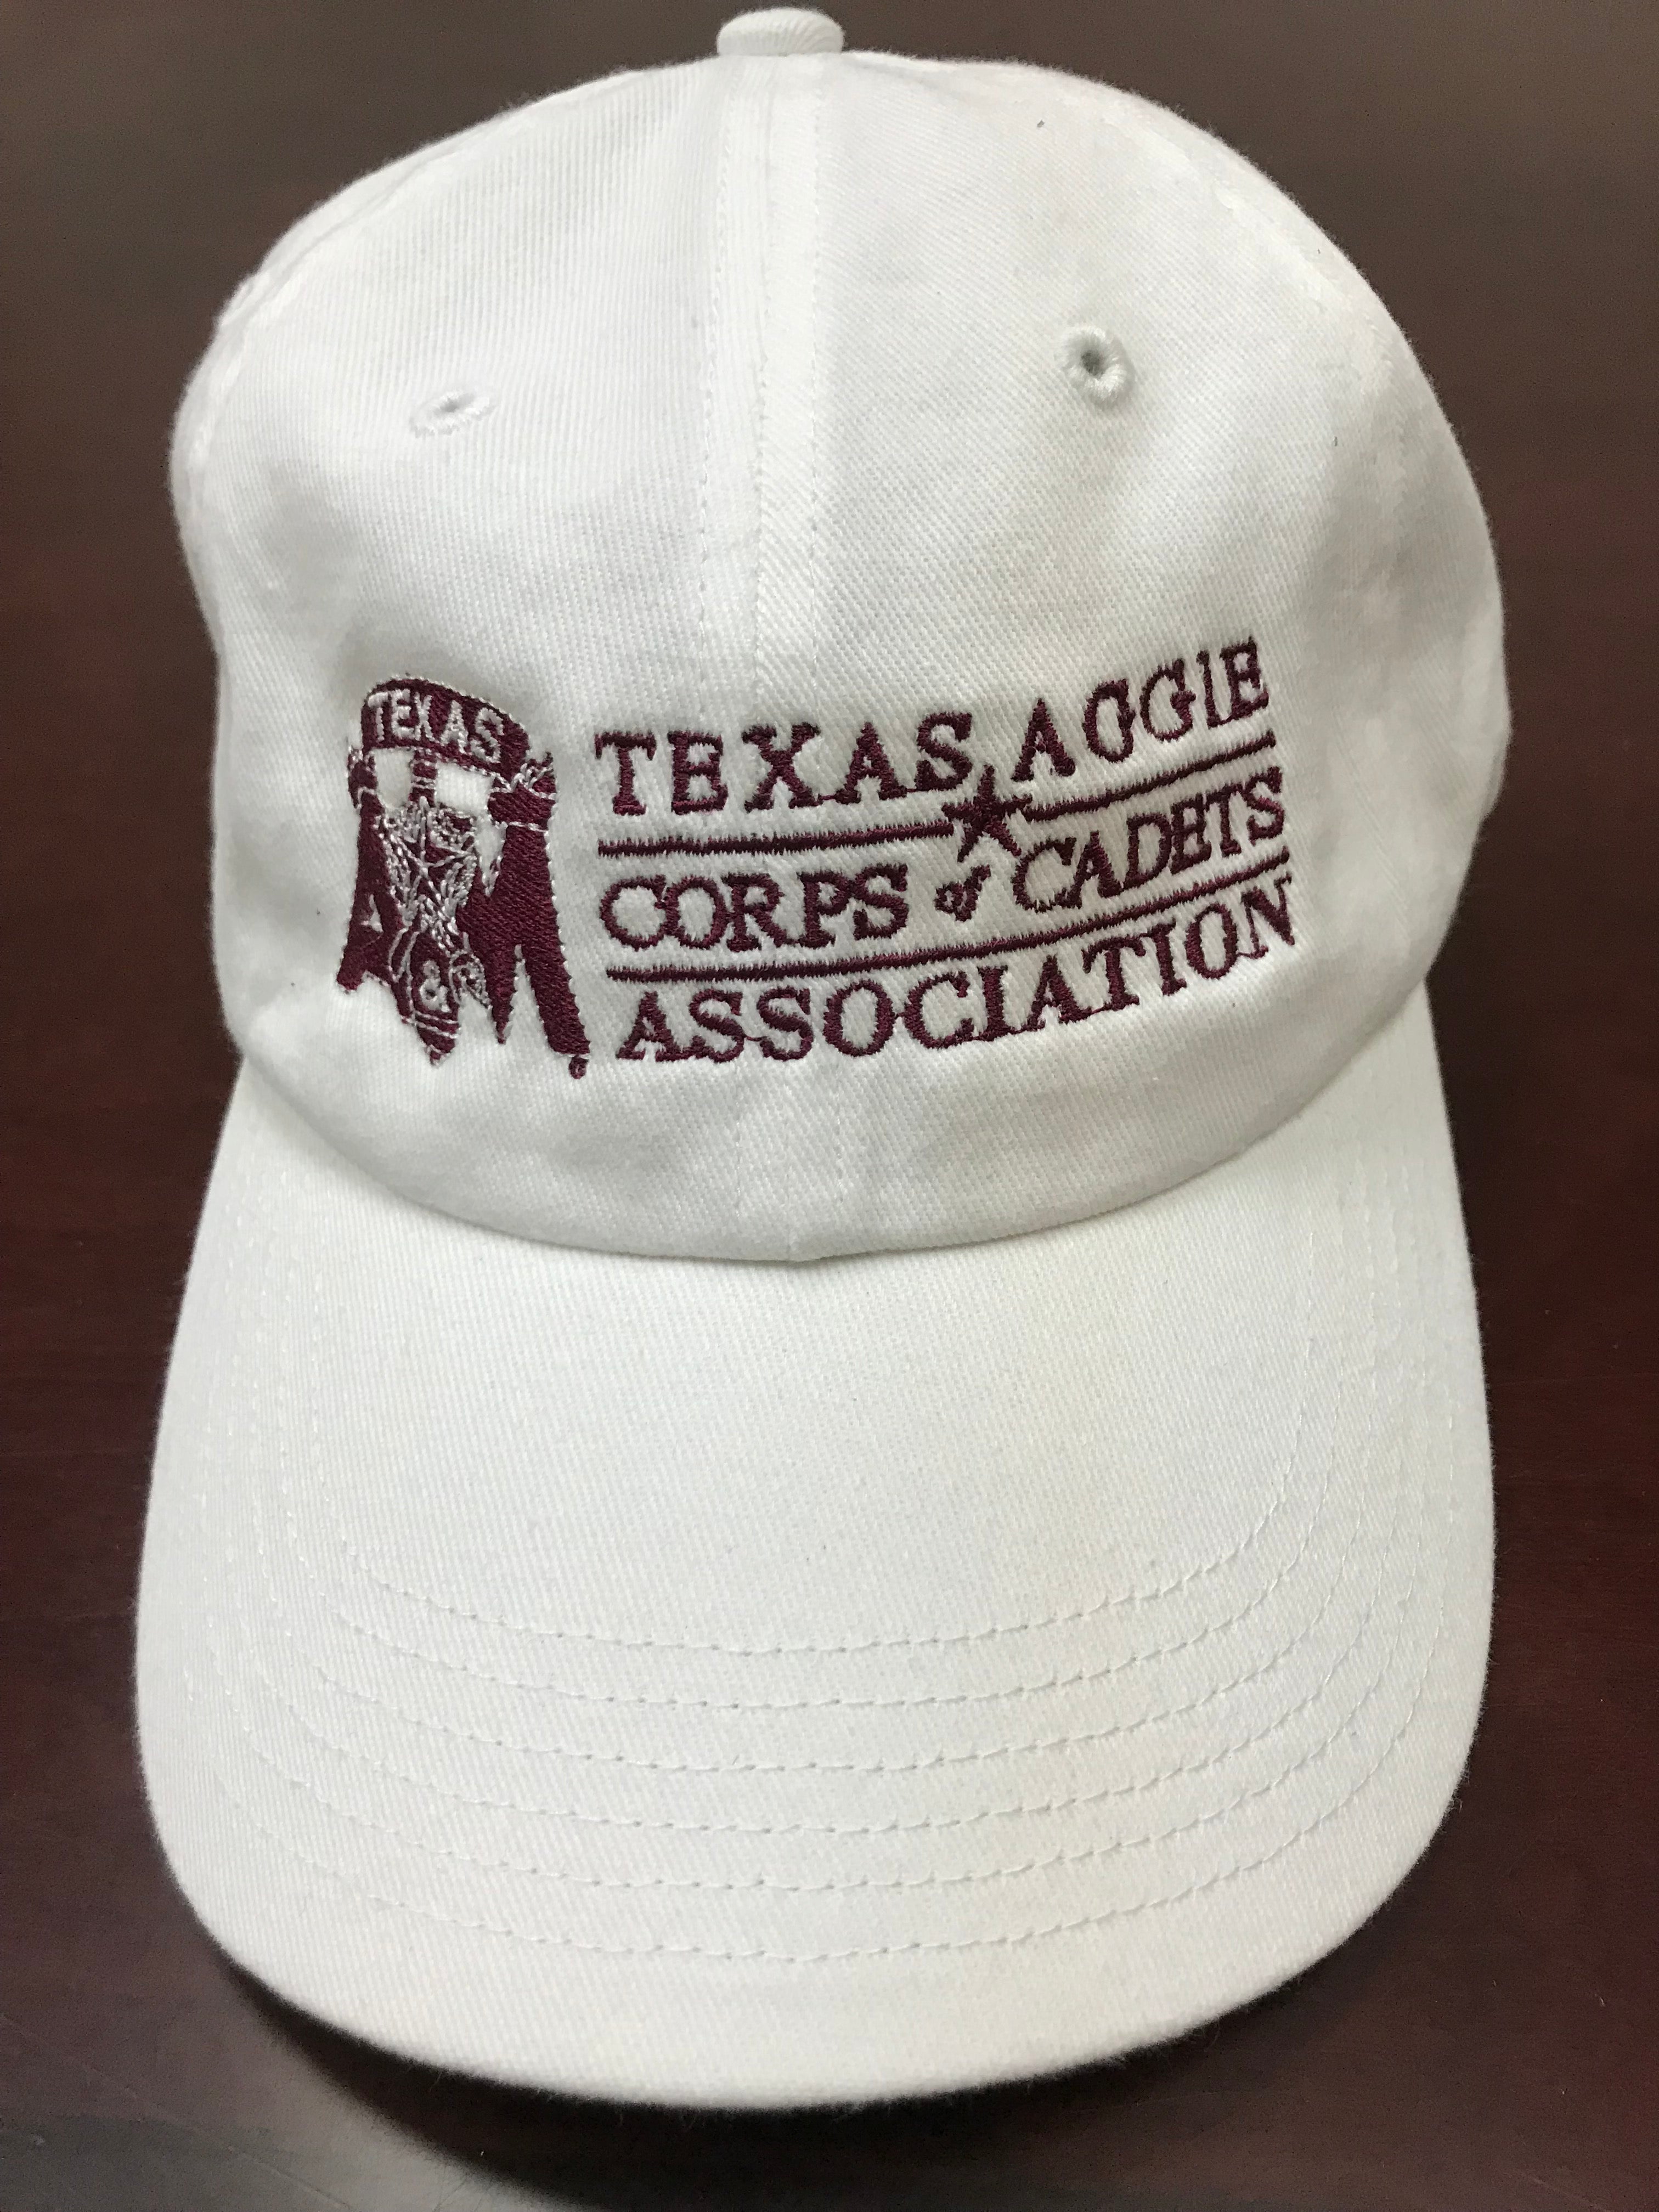 Corps of Cadets Association Unstructured Hat (White)